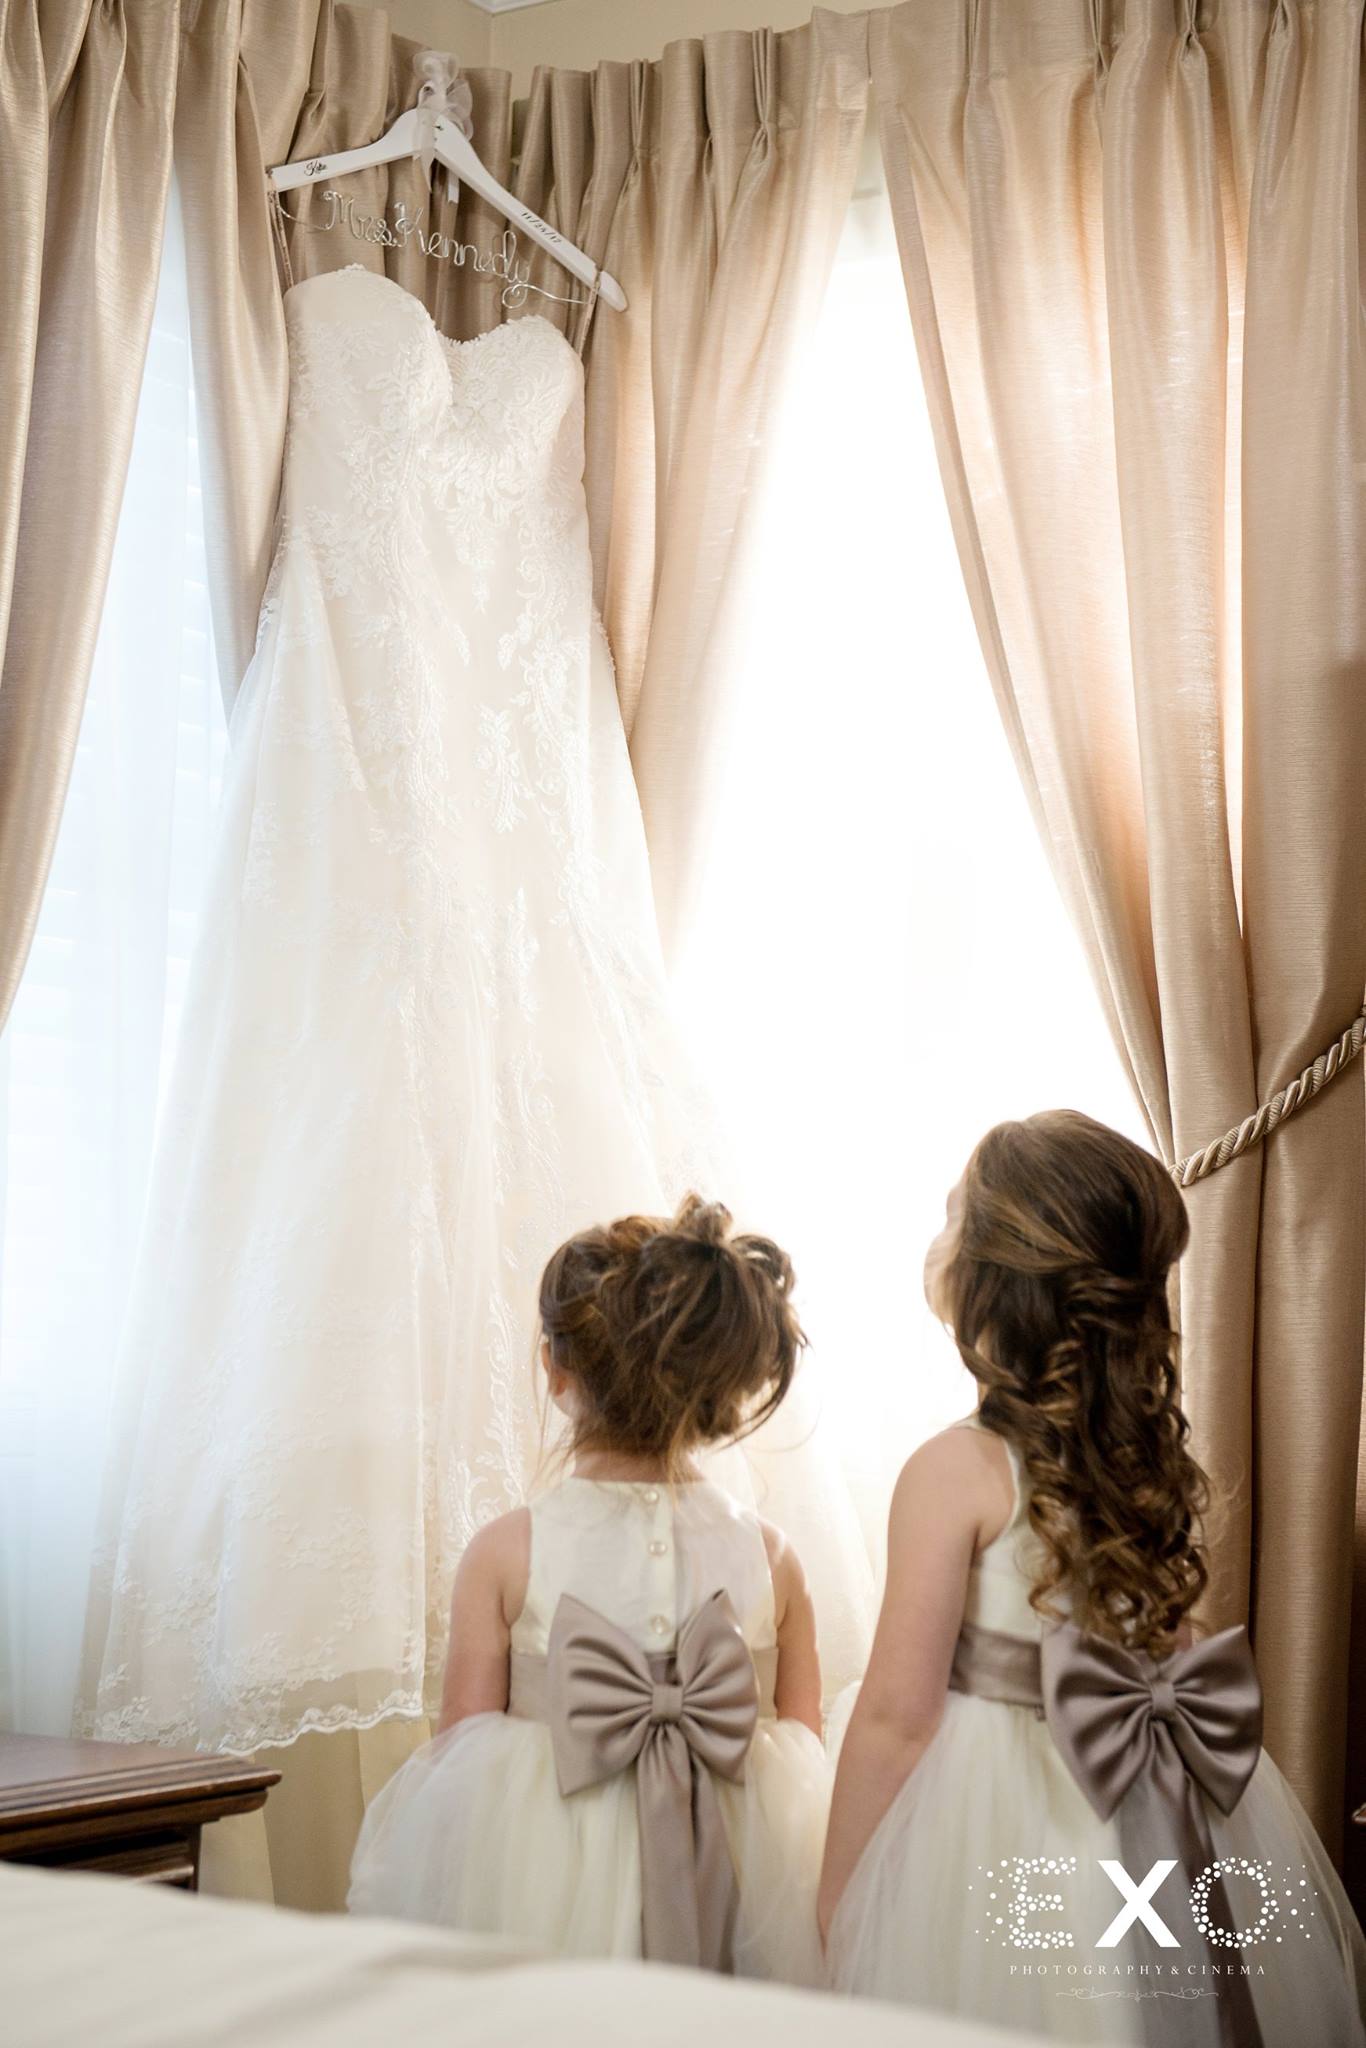 flower girls looking at bridal gown in window